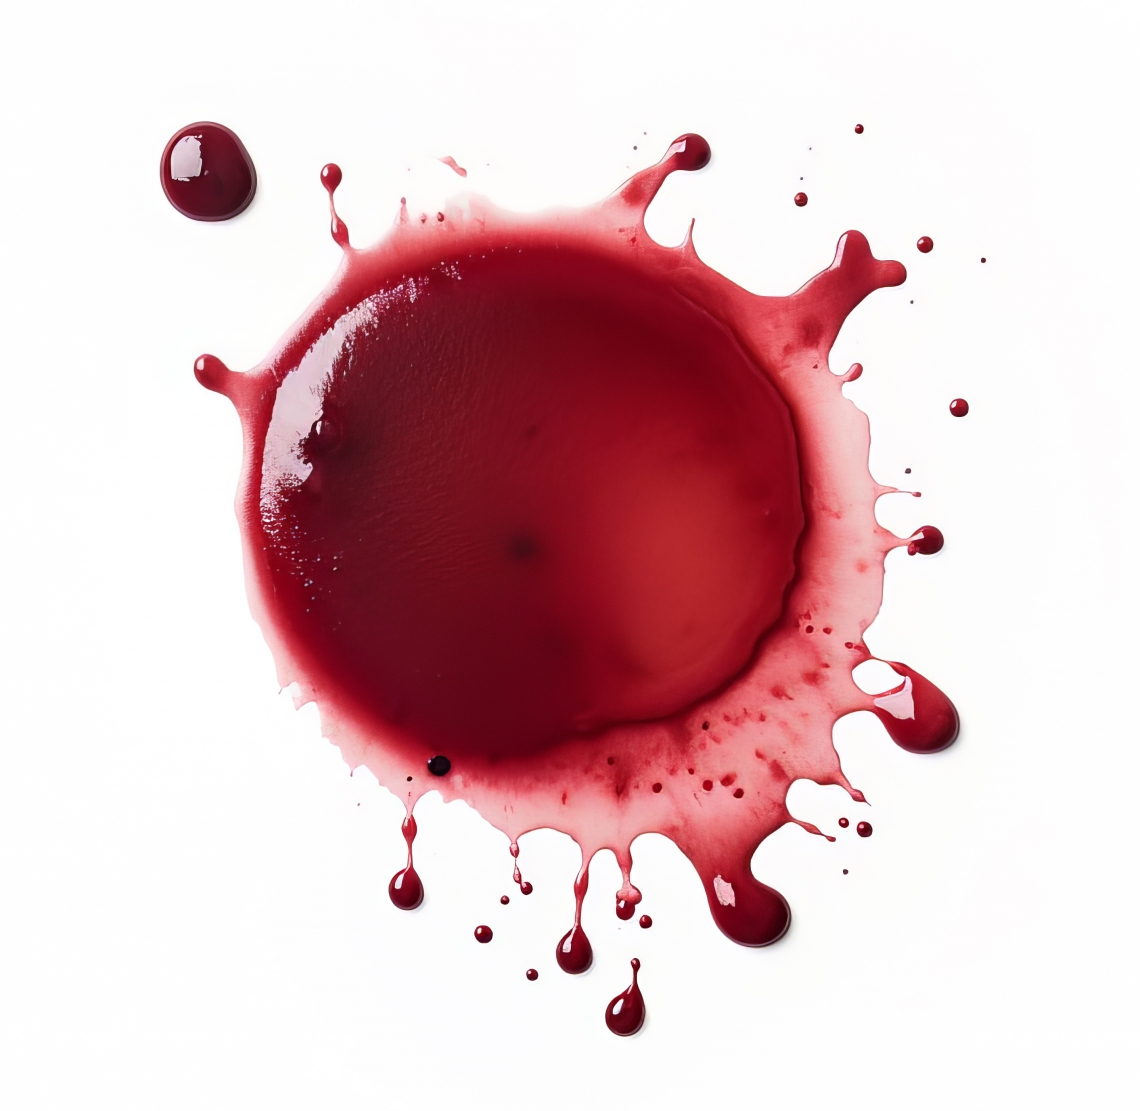 Blood_Stains_030